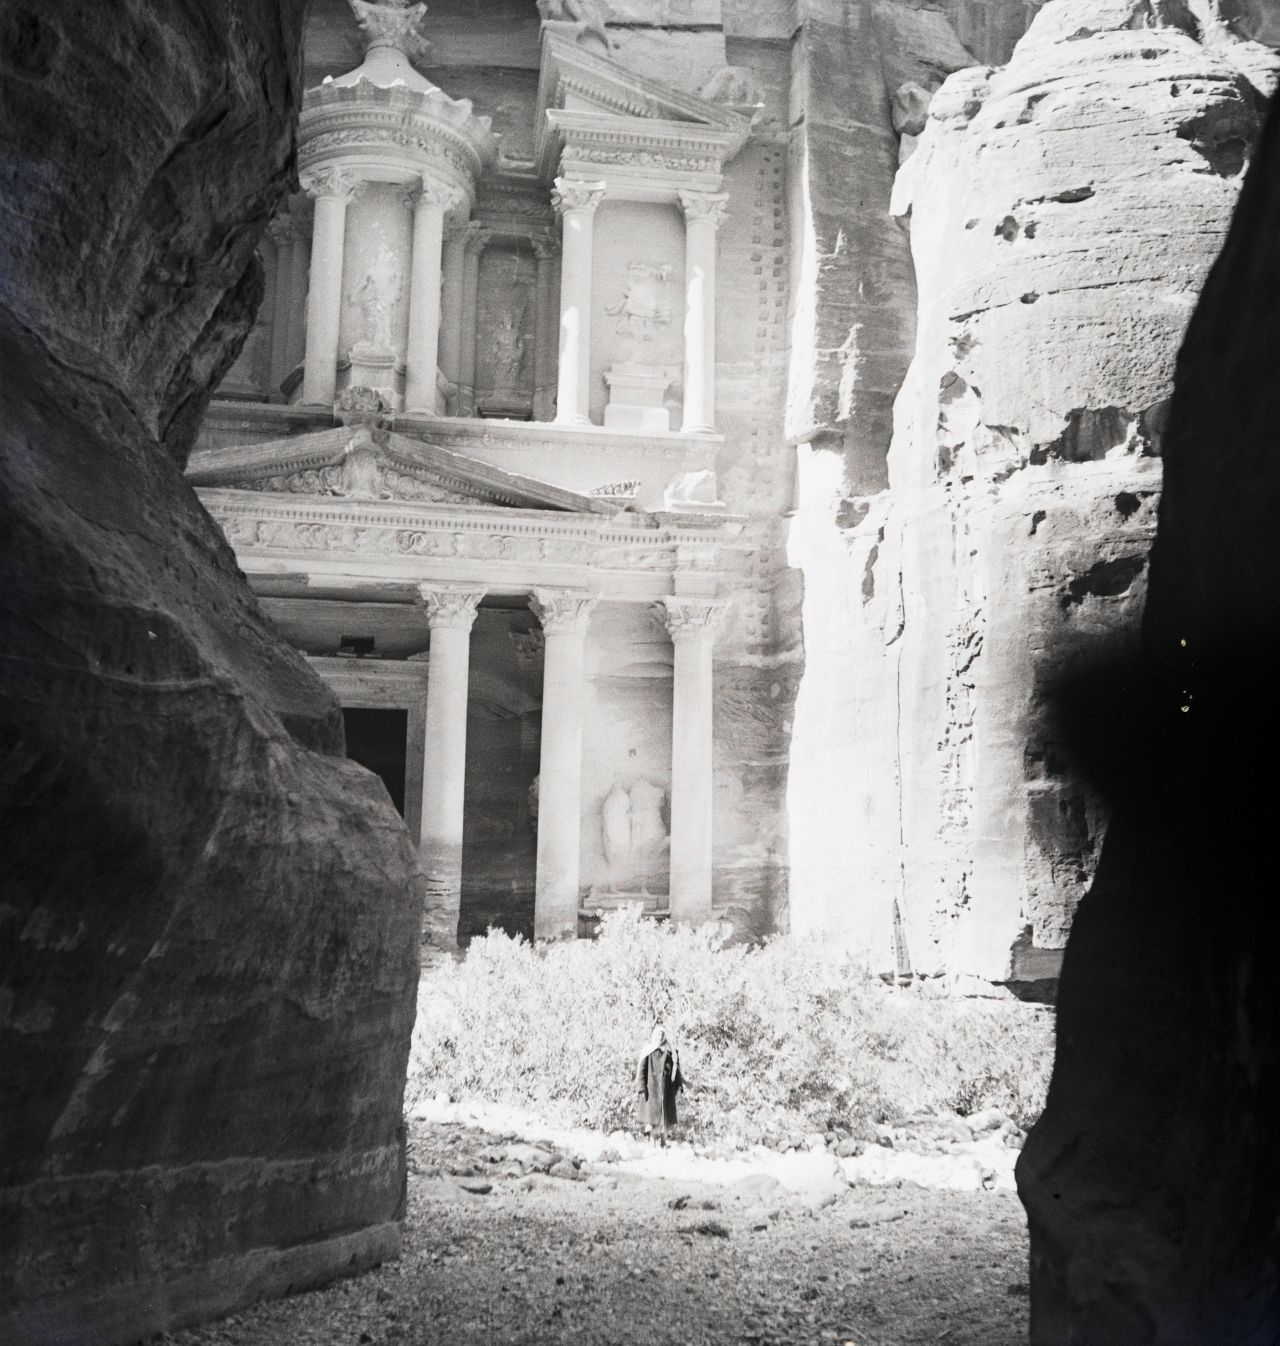 <strong>Ancient Petra: </strong>Mittelholzer often followed the routes taken by earlier explorers of Asia and Africa. In 1934, he made a four-day visit to the ancient city of Petra, in Jordan, known for its rock-hewn architecture.